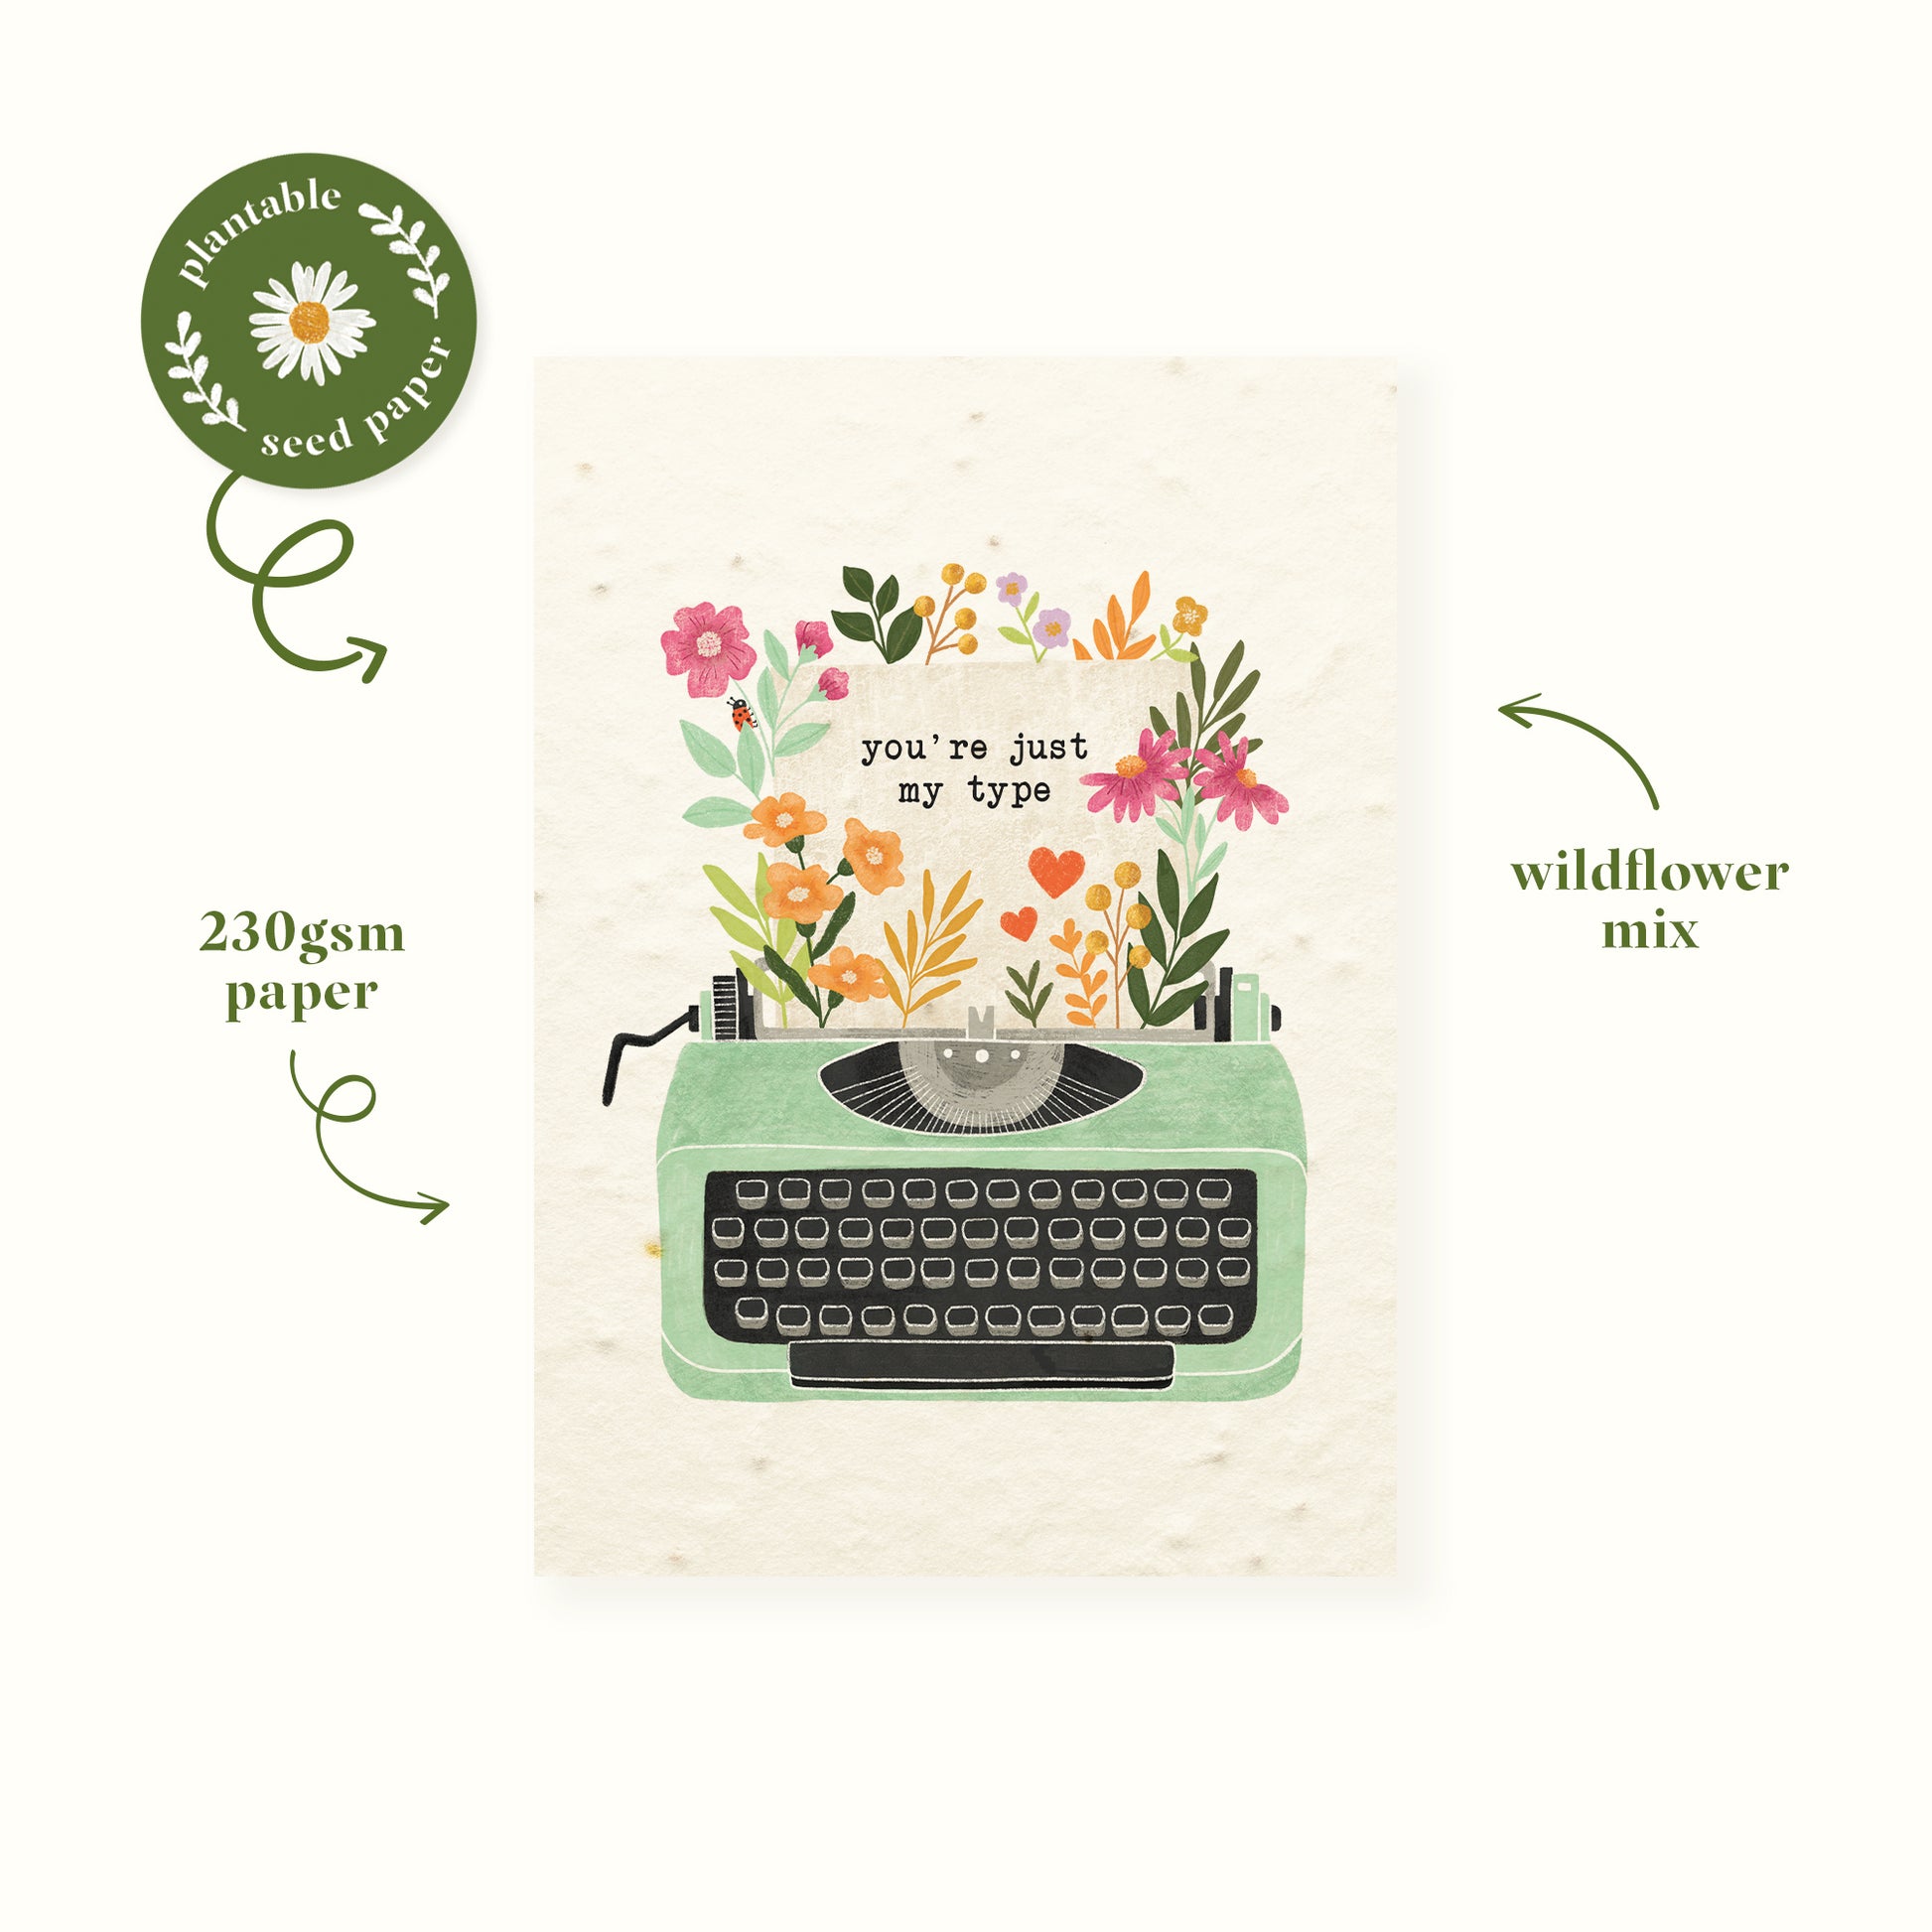 Eco-friendly Plantable typewriter valentine's day card with wildflowers